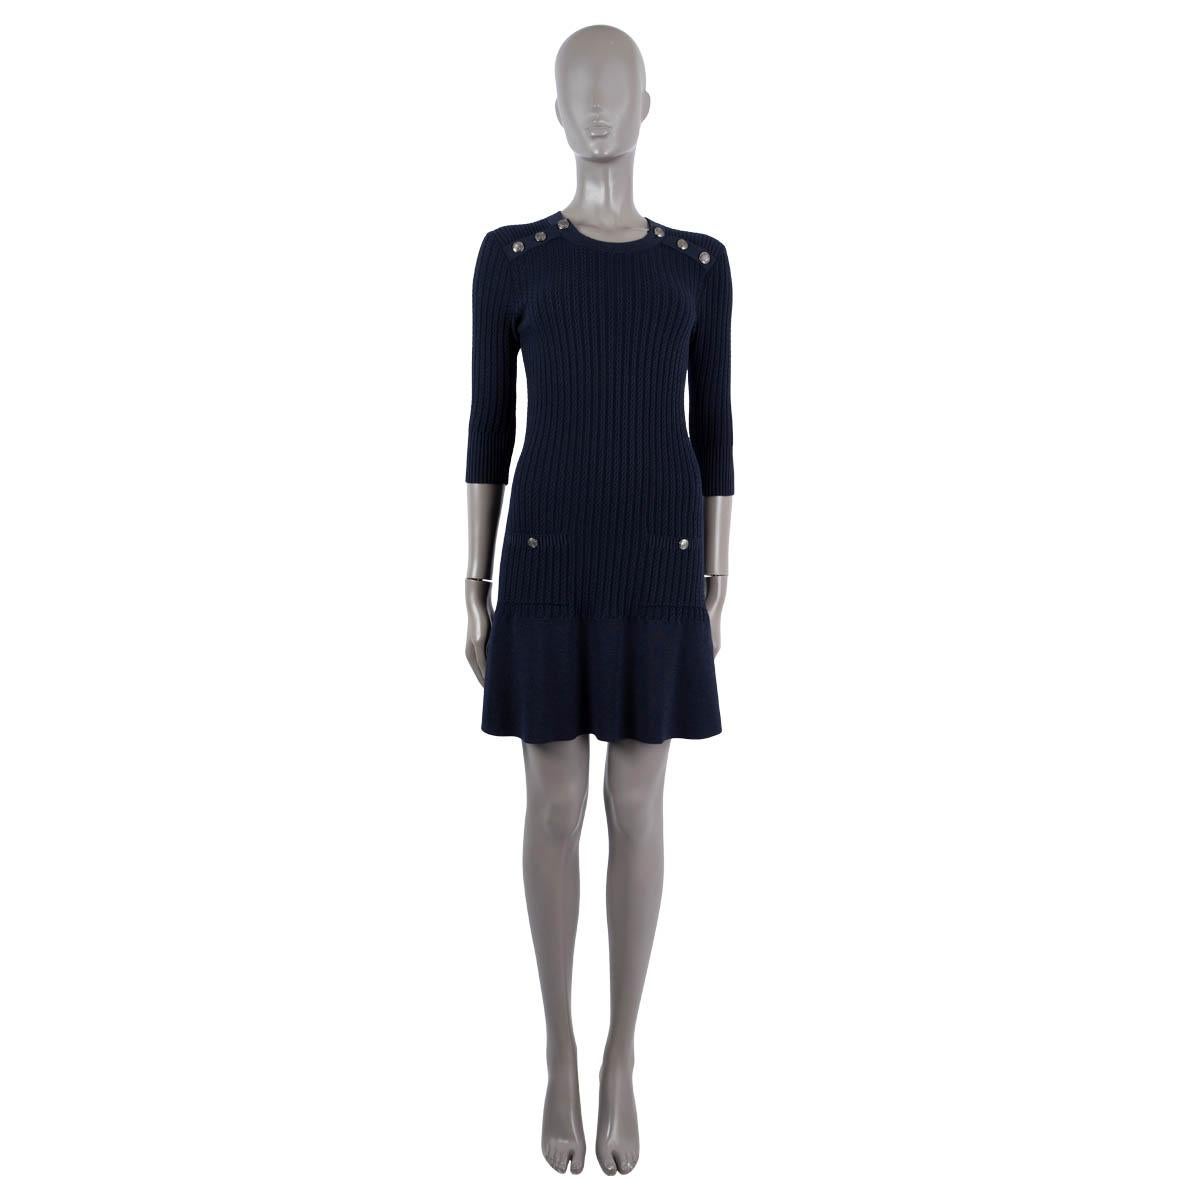 100% authentic Chanel braid knit dress in navy blue cotton (40%), wool (35%) and polyamide (25%). Features dark silver anchor buttons on the neck and two buttoned pockets on the front. Unlined. Has been worn and is in excellent condition.

2018